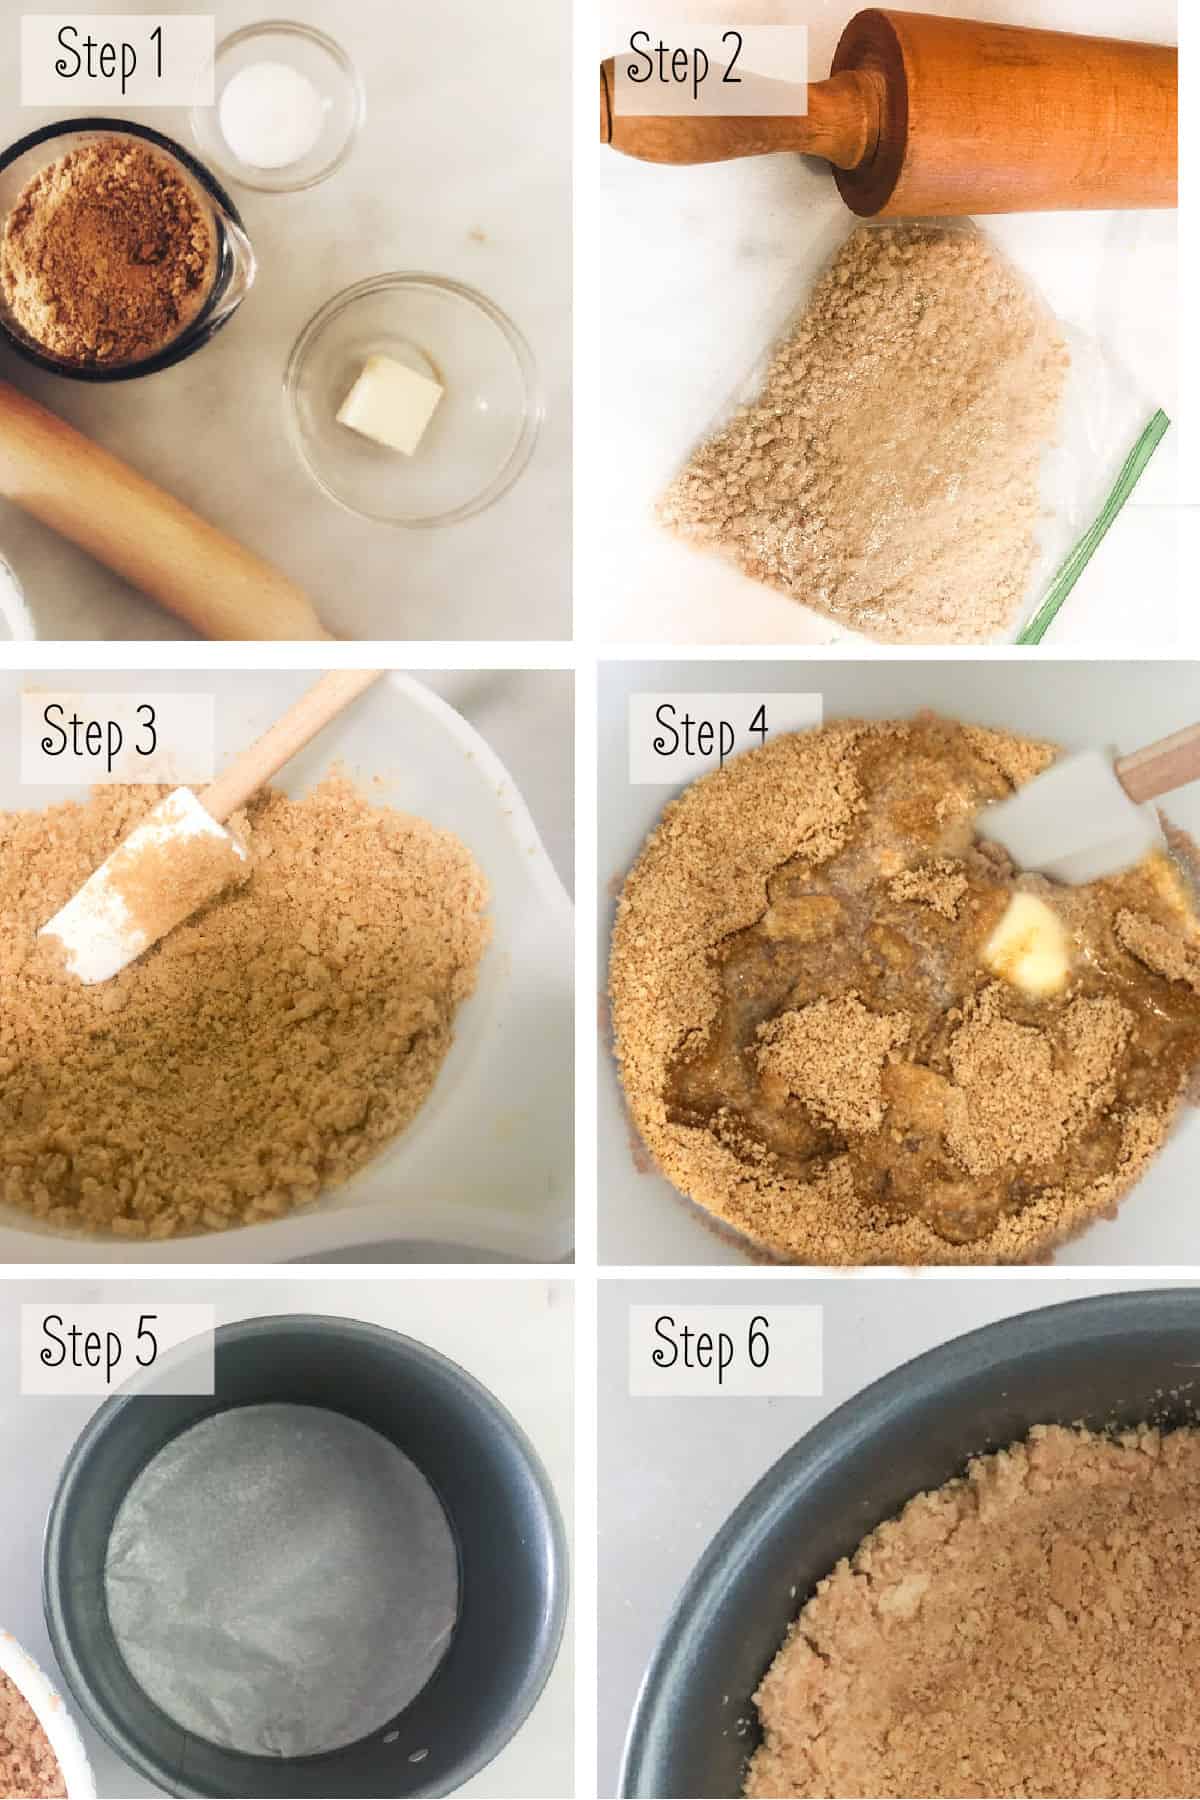 Collage of steps to mix together a graham cracker crust showing a measuring cup, rolling pin, crushed graham crackers, butter and sugar.